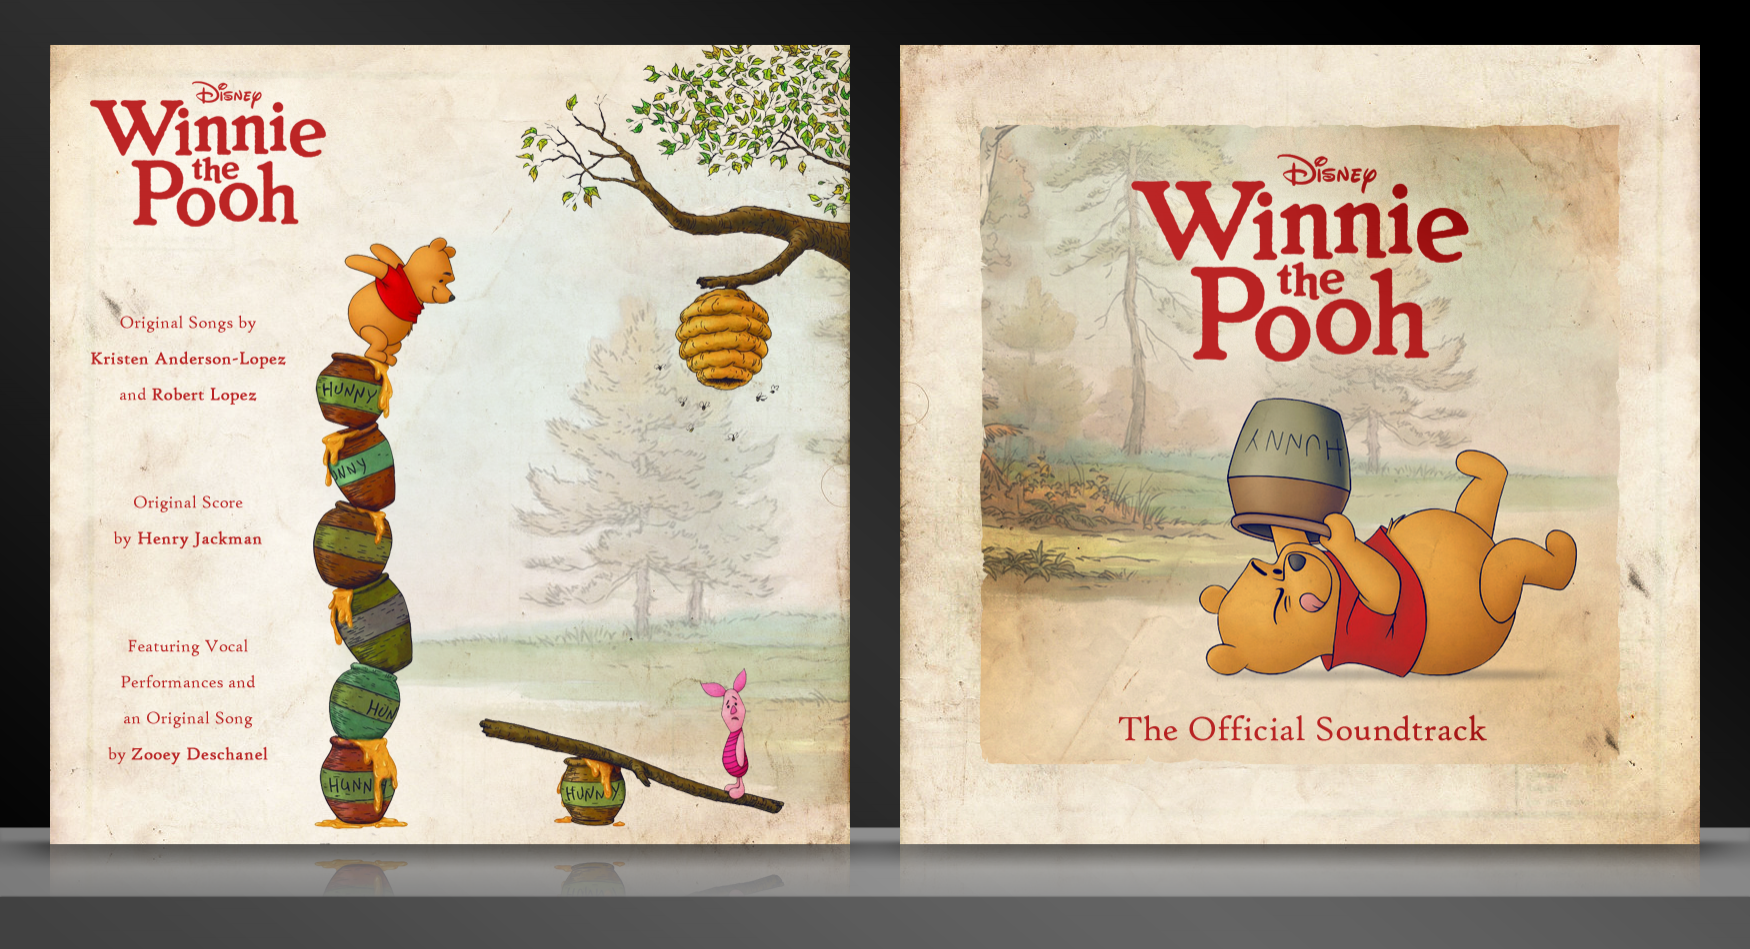 Winnie the Pooh - The Official Soundtrack box cover